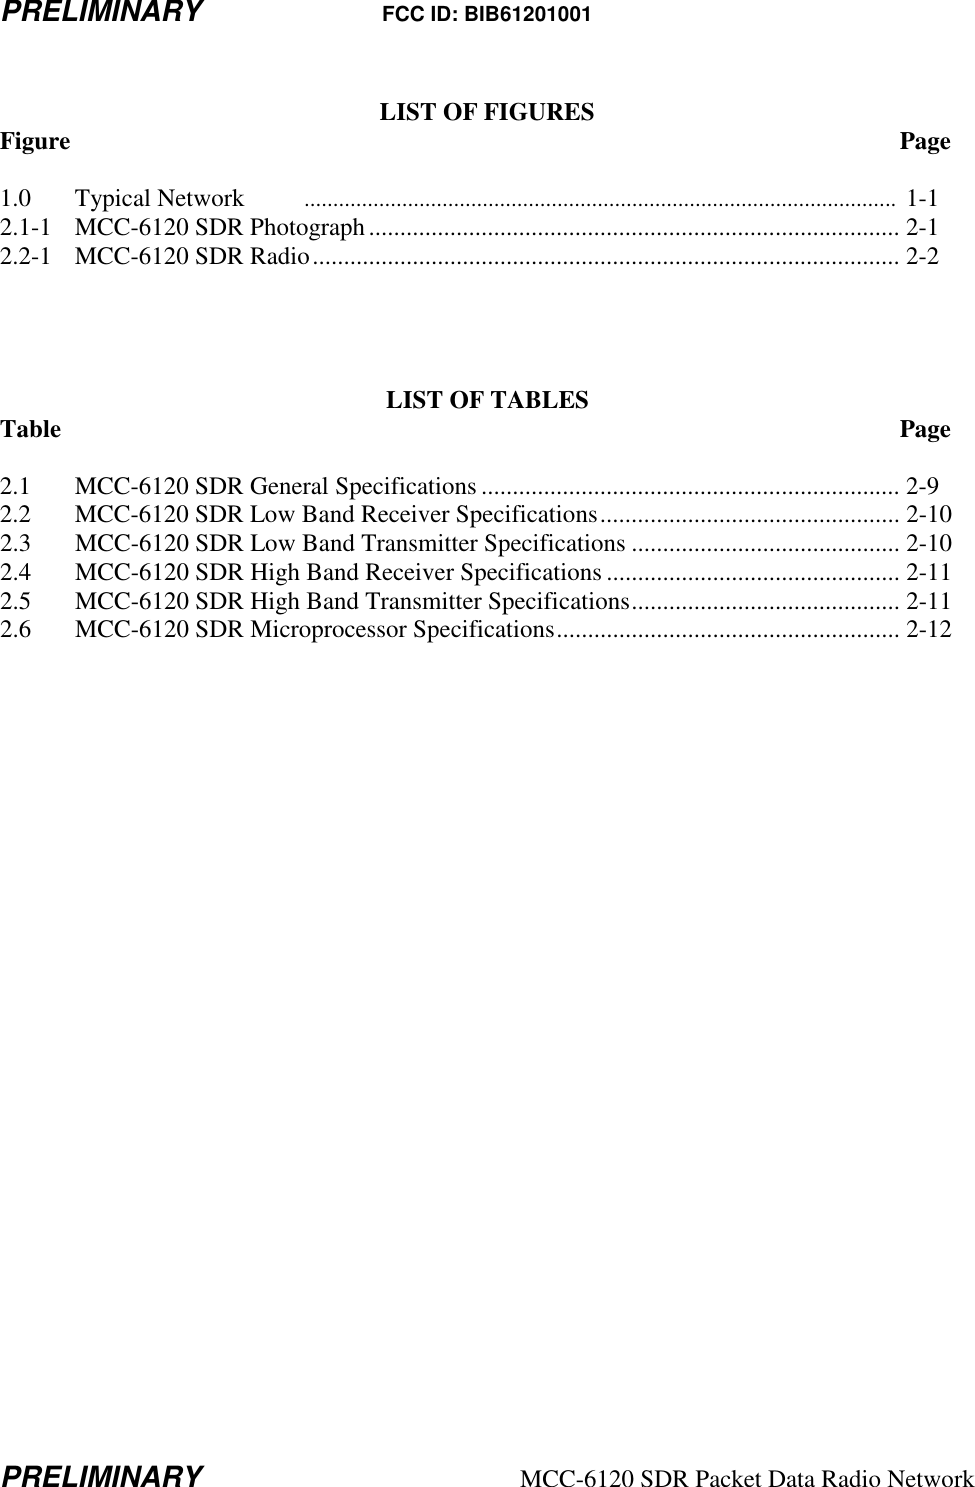 PRELIMINARY FCC ID: BIB61201001 PRELIMINARY  MCC-6120 SDR Packet Data Radio Network  LIST OF FIGURES Figure                           Page  1.0  Typical Network  .......................................................................................................  1-1 2.1-1  MCC-6120 SDR Photograph..................................................................................... 2-1 2.2-1  MCC-6120 SDR Radio.............................................................................................. 2-2     LIST OF TABLES Table                            Page  2.1  MCC-6120 SDR General Specifications ................................................................... 2-9 2.2  MCC-6120 SDR Low Band Receiver Specifications................................................ 2-10 2.3  MCC-6120 SDR Low Band Transmitter Specifications ........................................... 2-10 2.4  MCC-6120 SDR High Band Receiver Specifications ............................................... 2-11 2.5  MCC-6120 SDR High Band Transmitter Specifications........................................... 2-11 2.6  MCC-6120 SDR Microprocessor Specifications....................................................... 2-12     